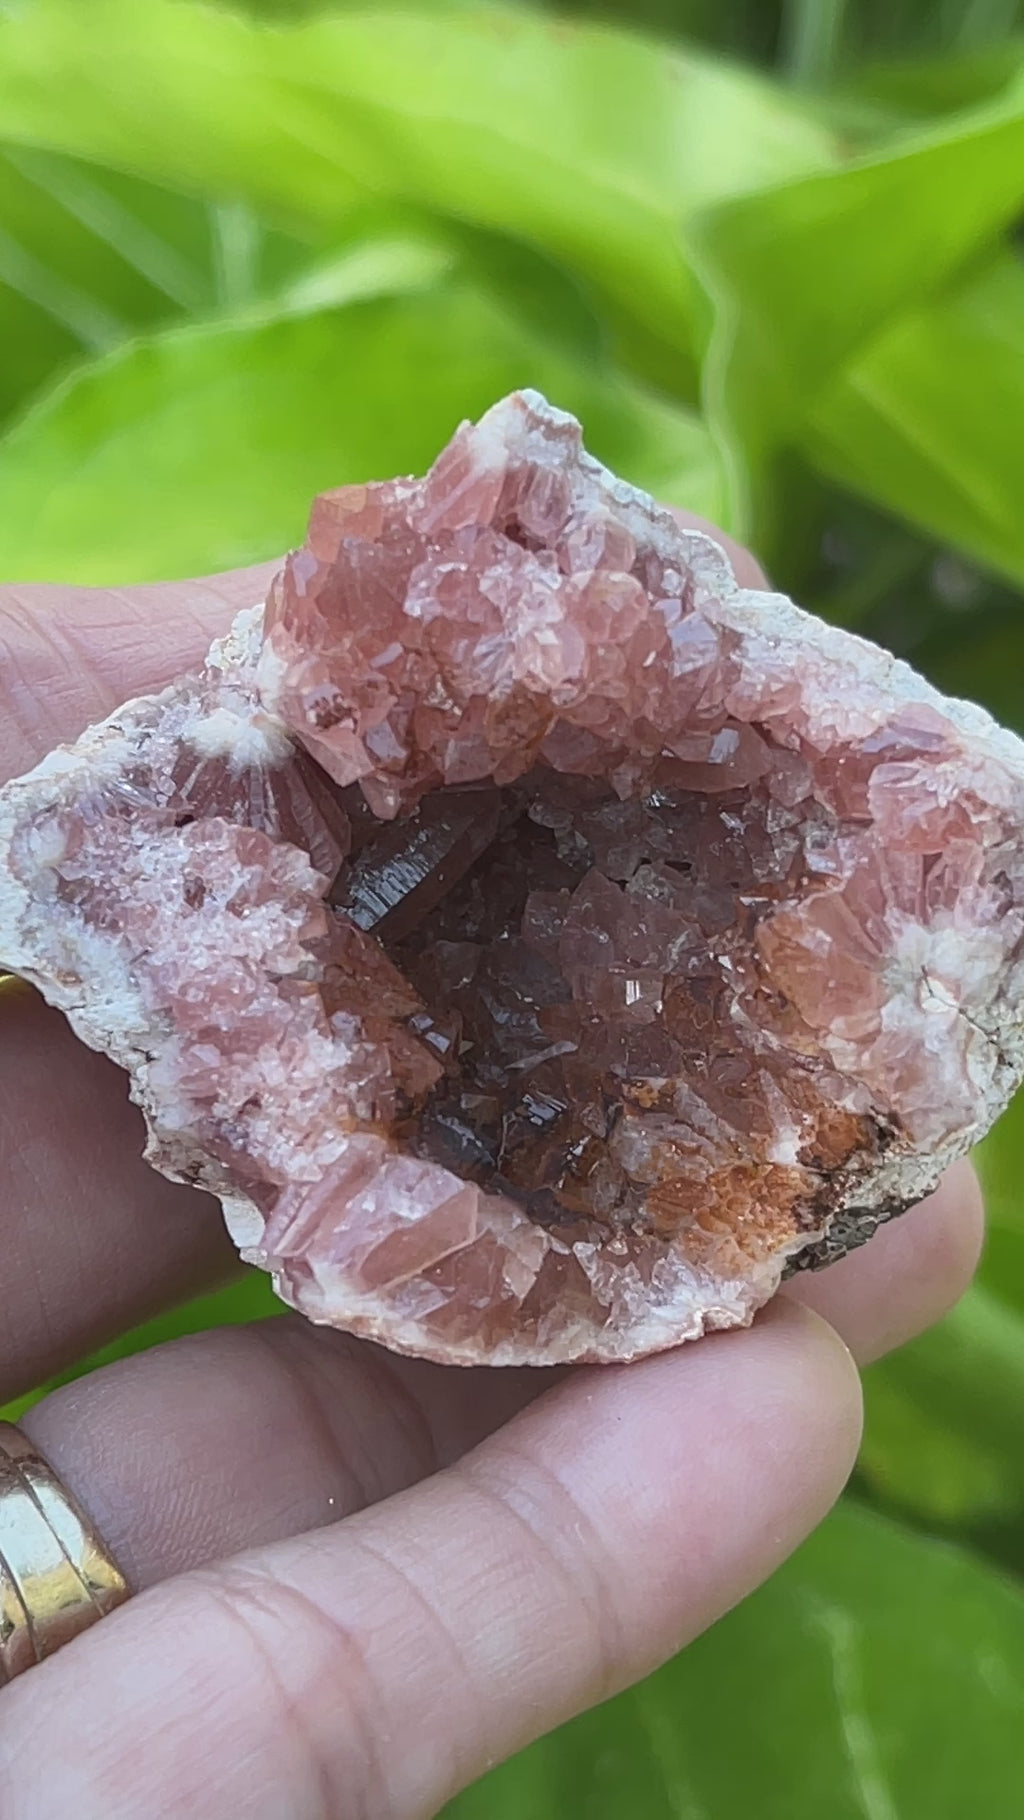 The darker color of the Pink Amethyst crystals is representative of a higher quality specimen.